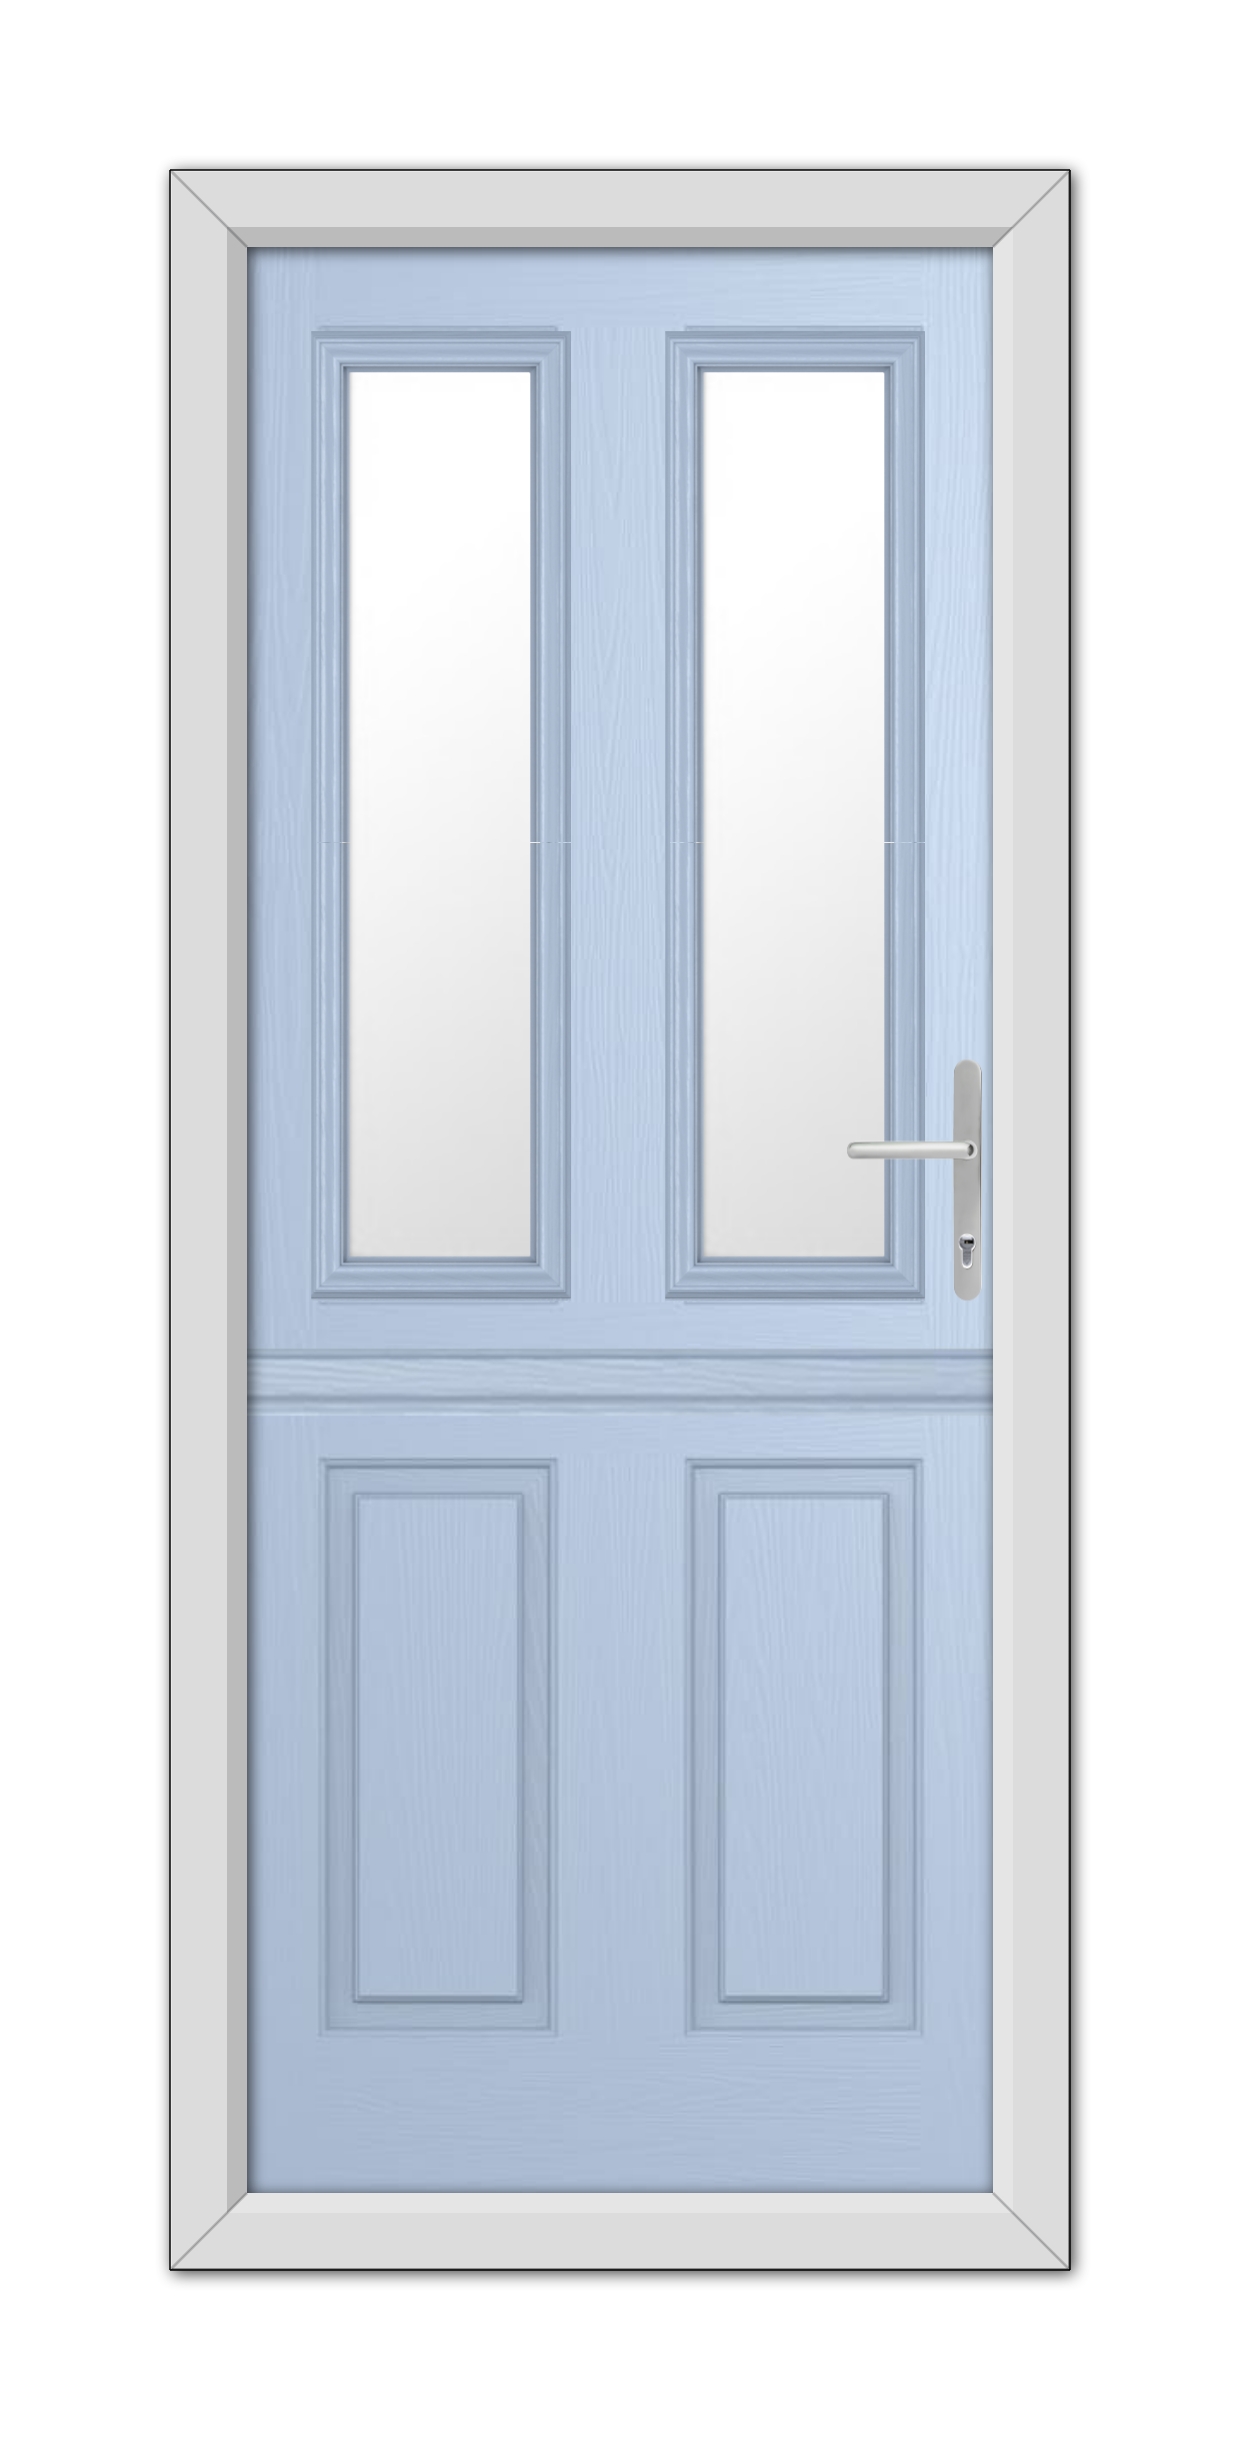 A Duck Egg Blue Whitmore Stable Composite Door 48mm Timber Core with rectangular white panels and a metallic handle, framed by a simple white border.